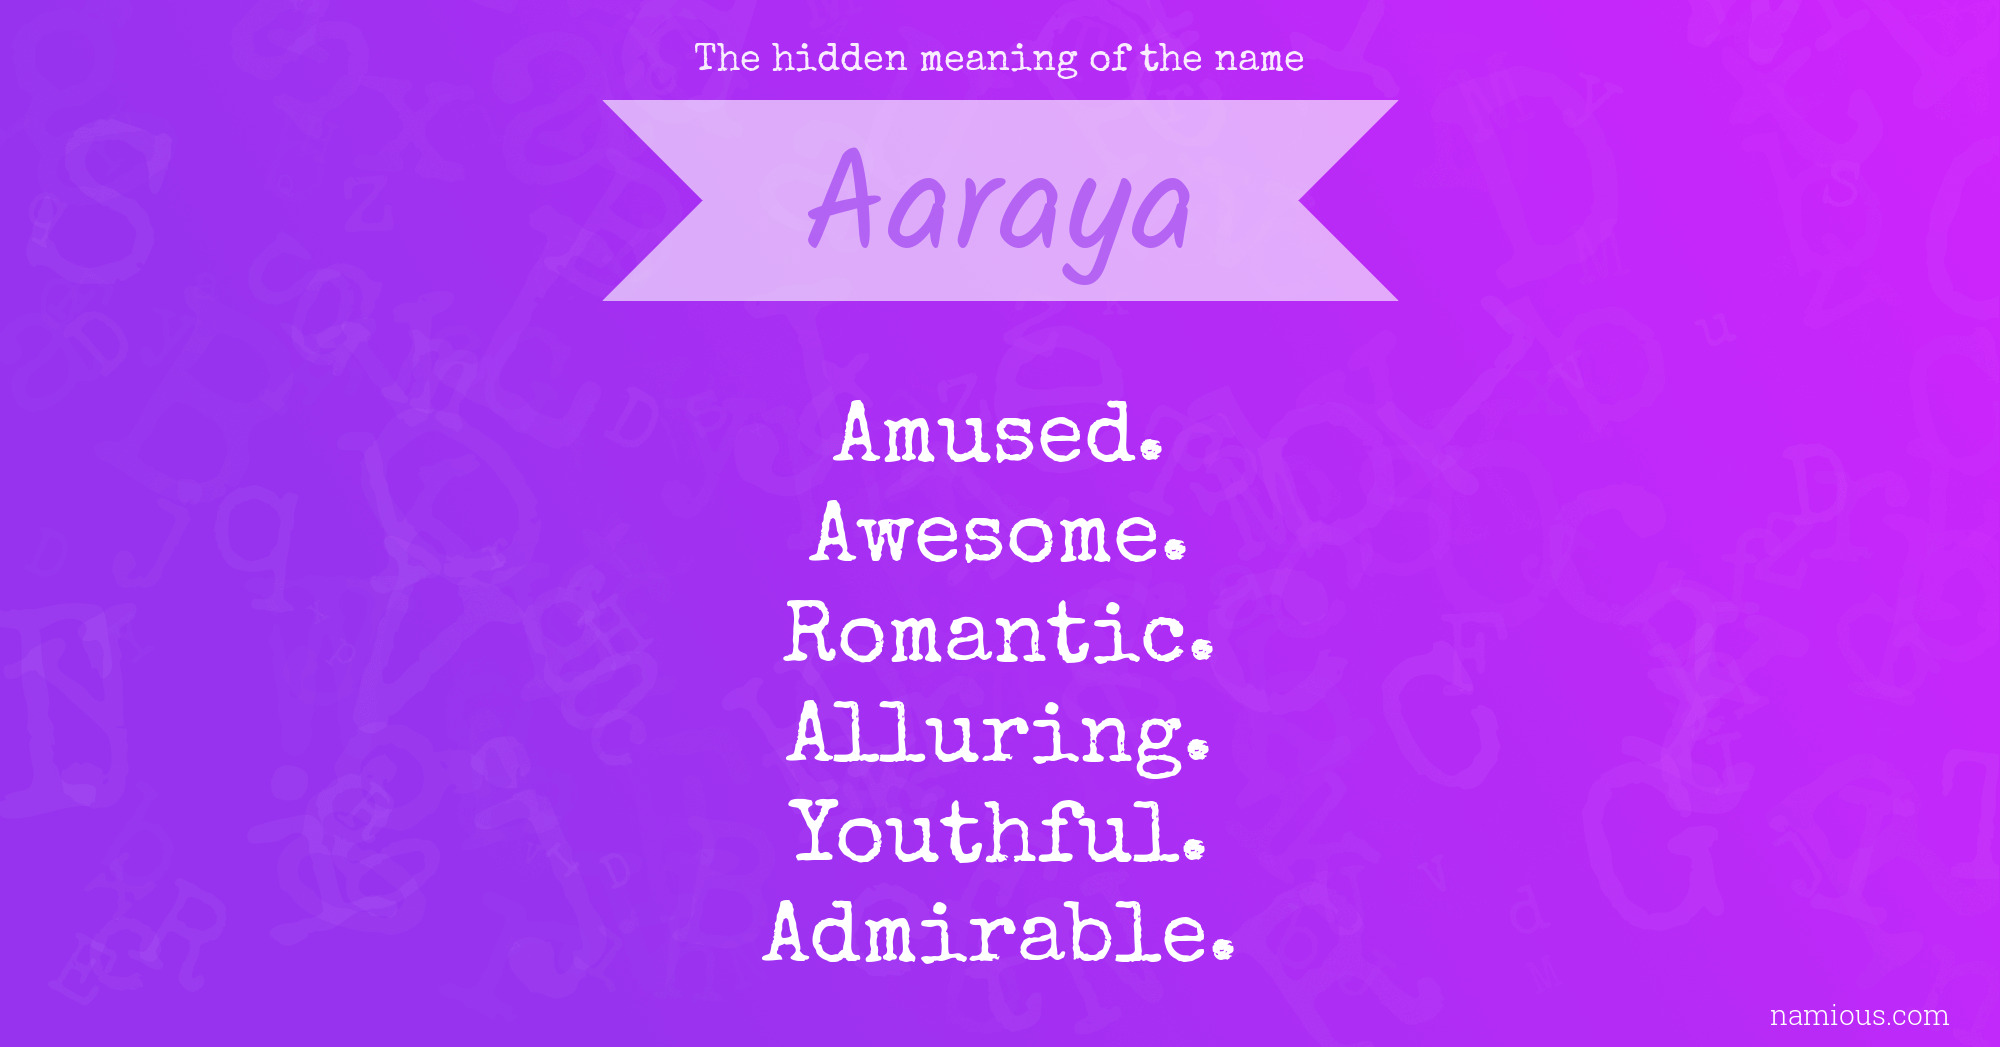 The hidden meaning of the name Aaraya